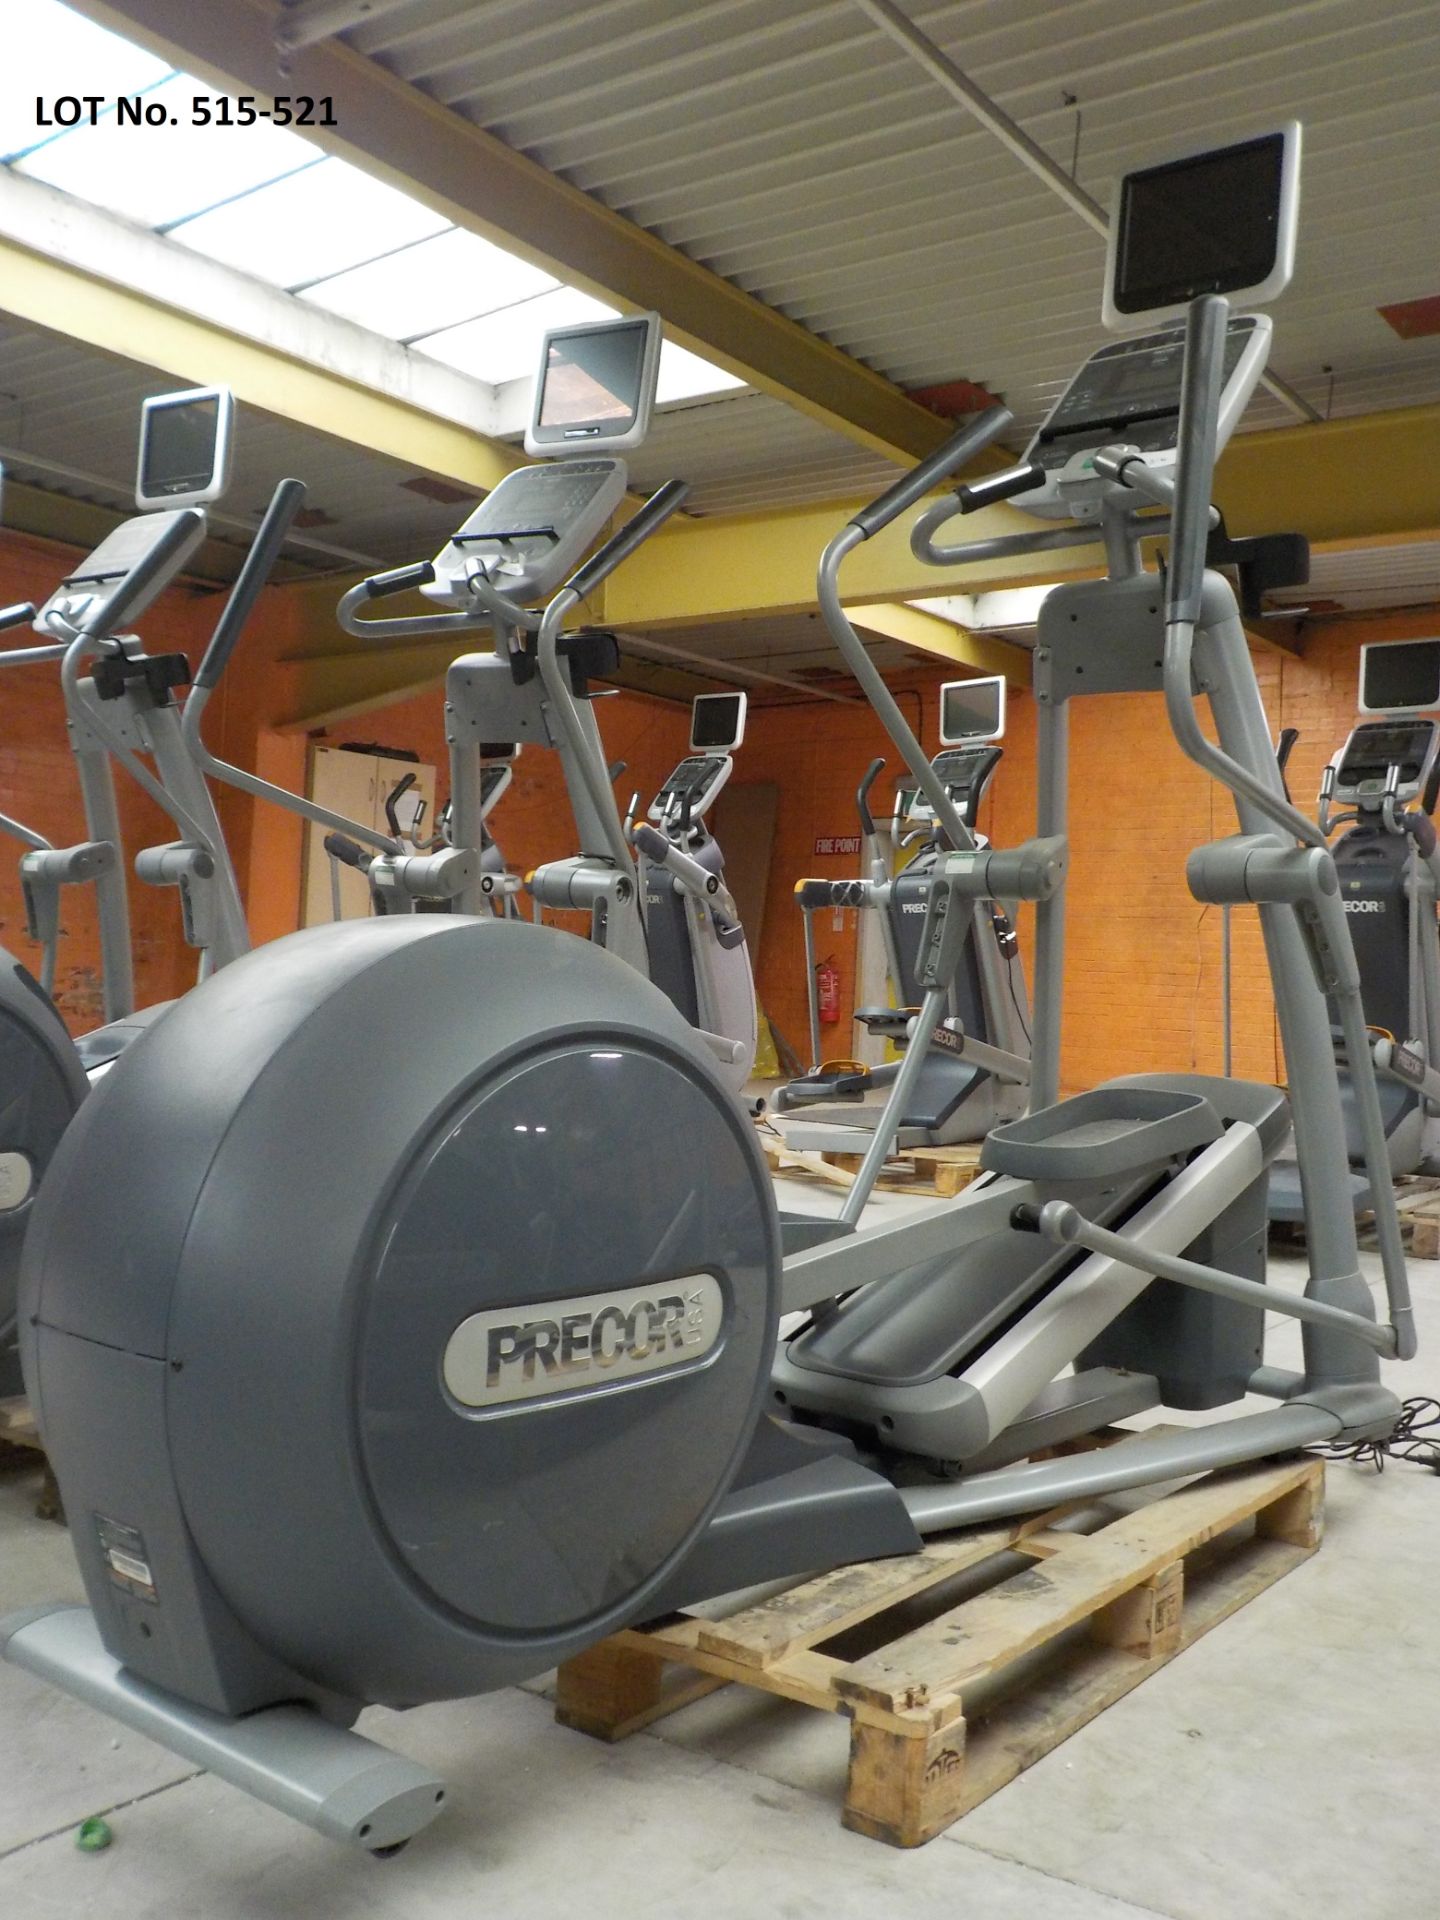 PRECOR ELLIPTICAL - EFX576i (WITH TV) serial number AA72K04090041 (broken rear cover) *PLEASE NOTE